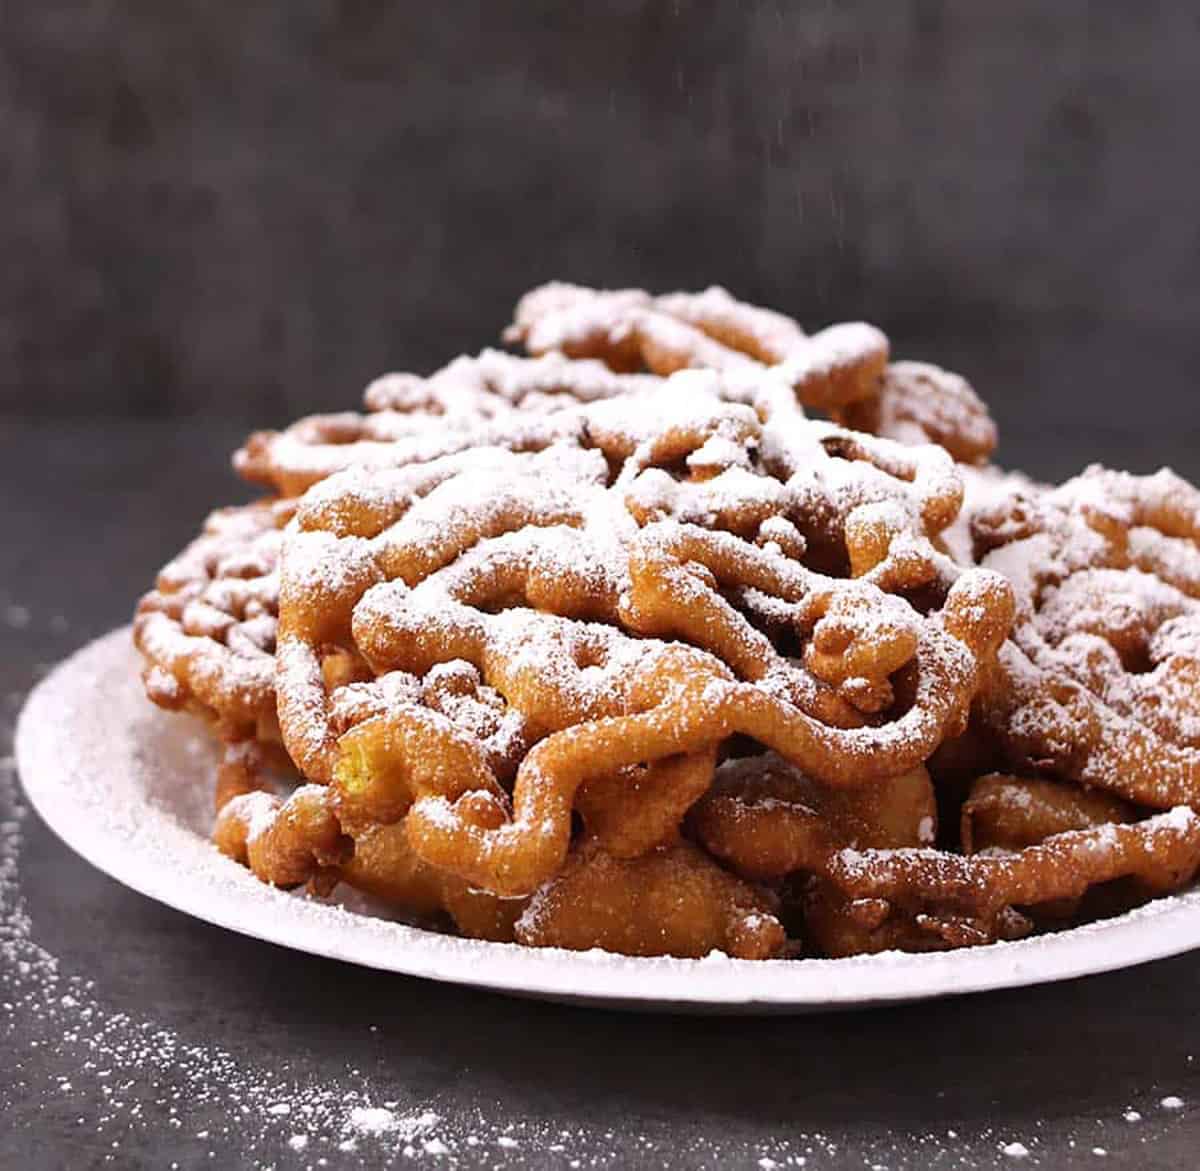 Side view of the best funnel cake recipe made at home from scratch